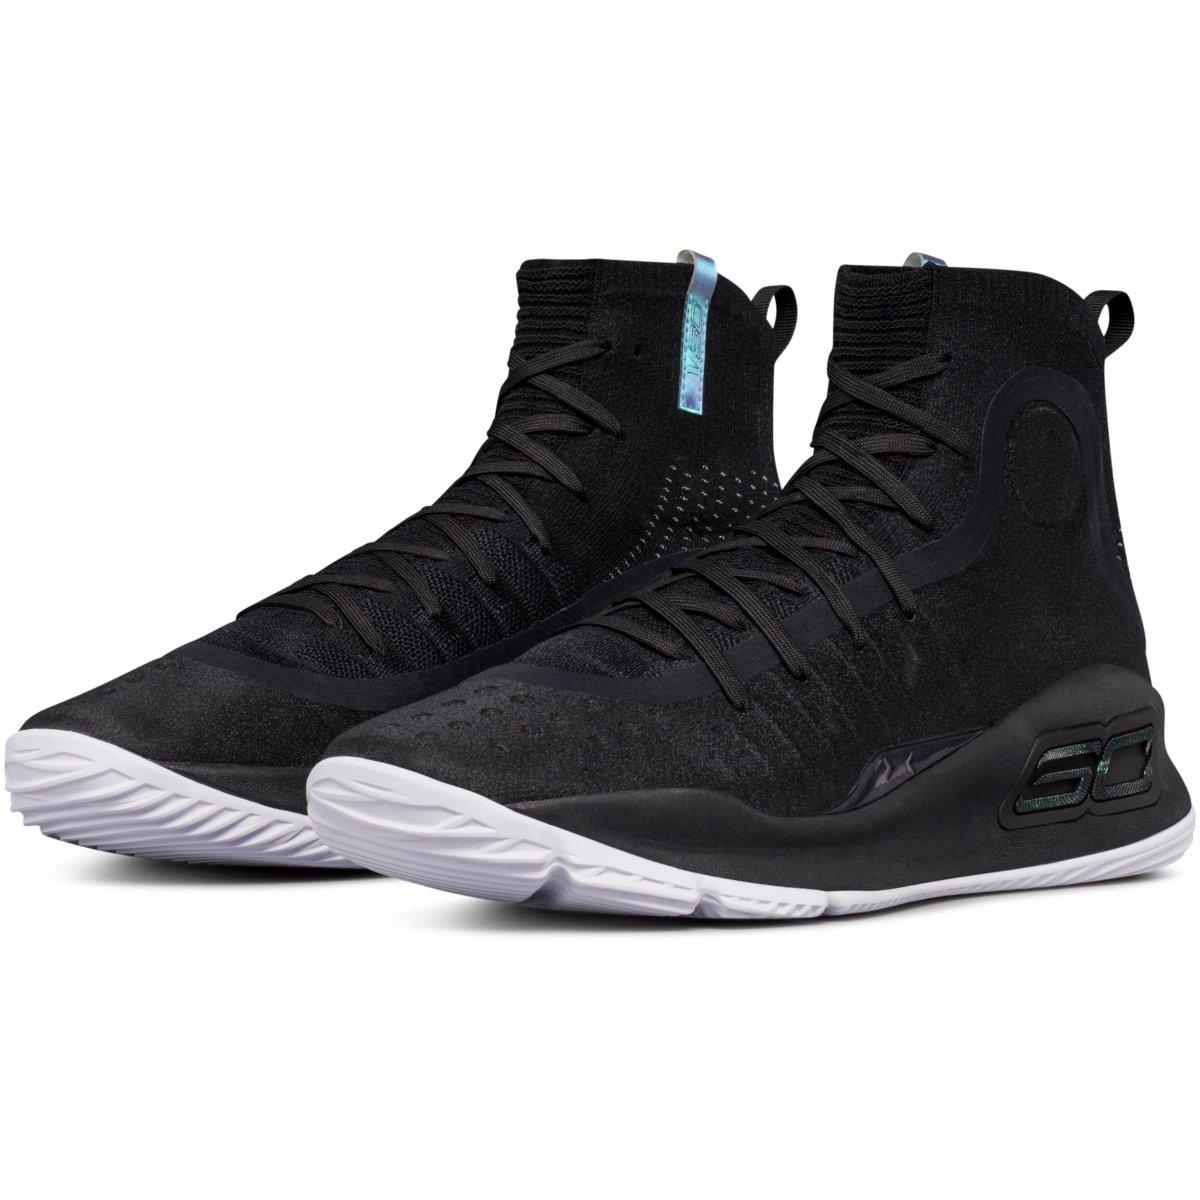 Basketball Shoes -  under armour Curry 4 8306